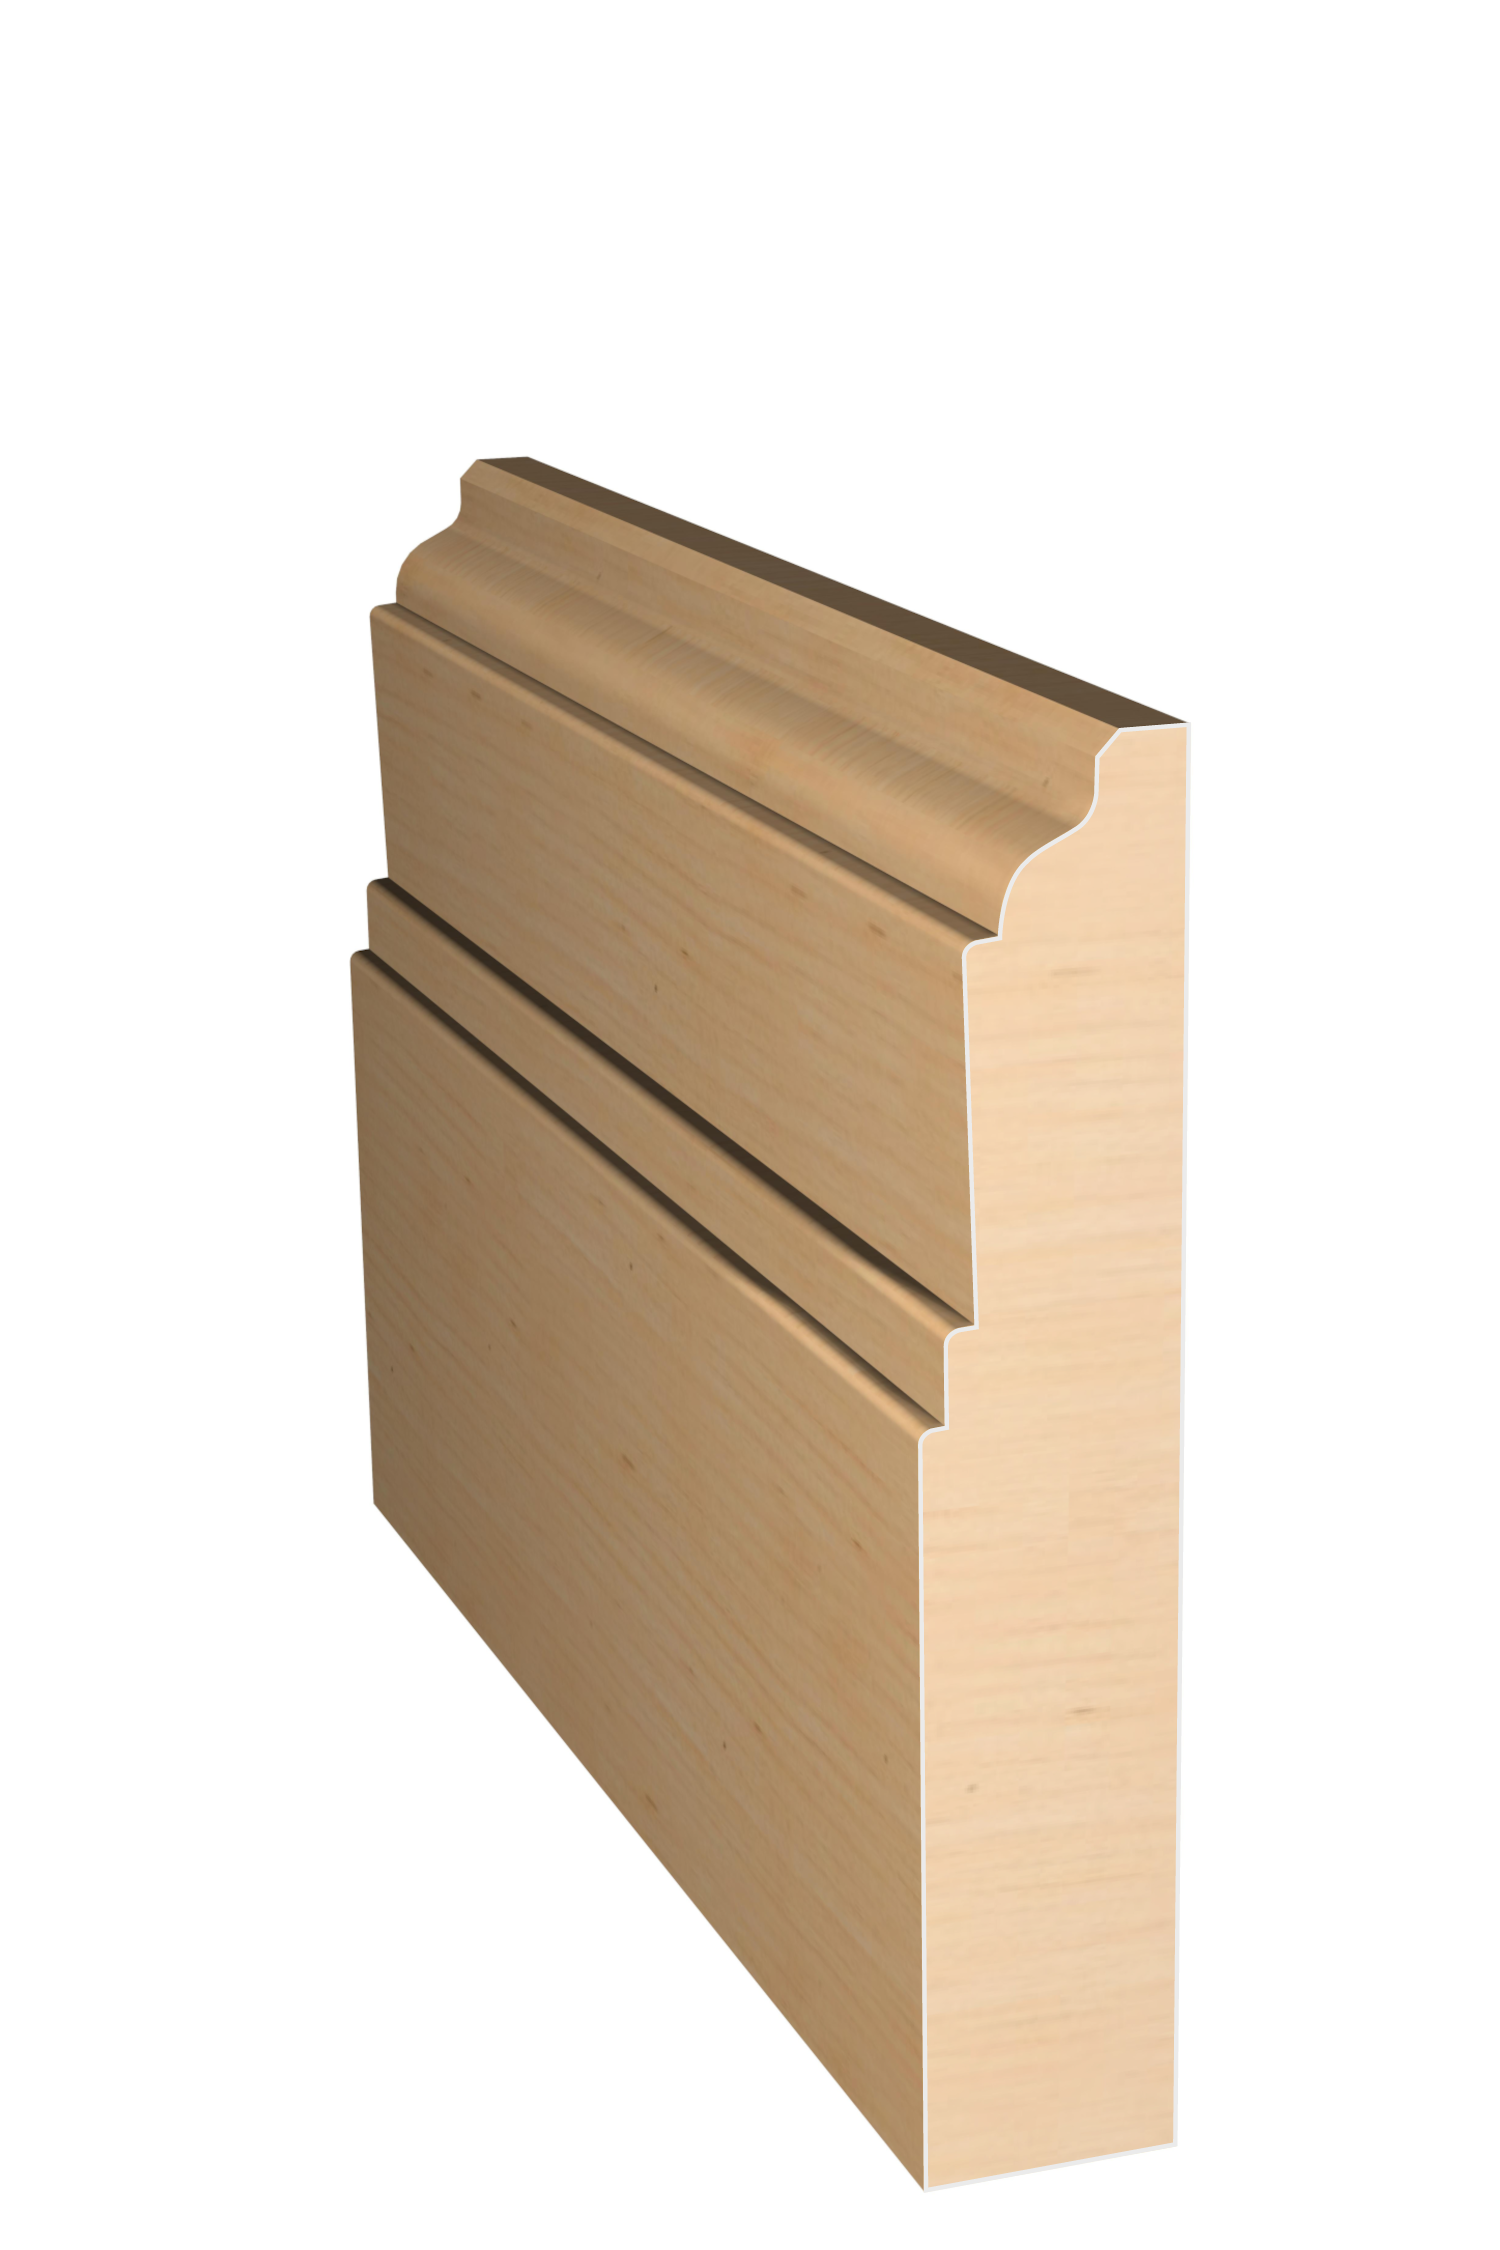 Three dimensional rendering of custom base wood molding BAPL418 made by Public Lumber Company in Detroit.